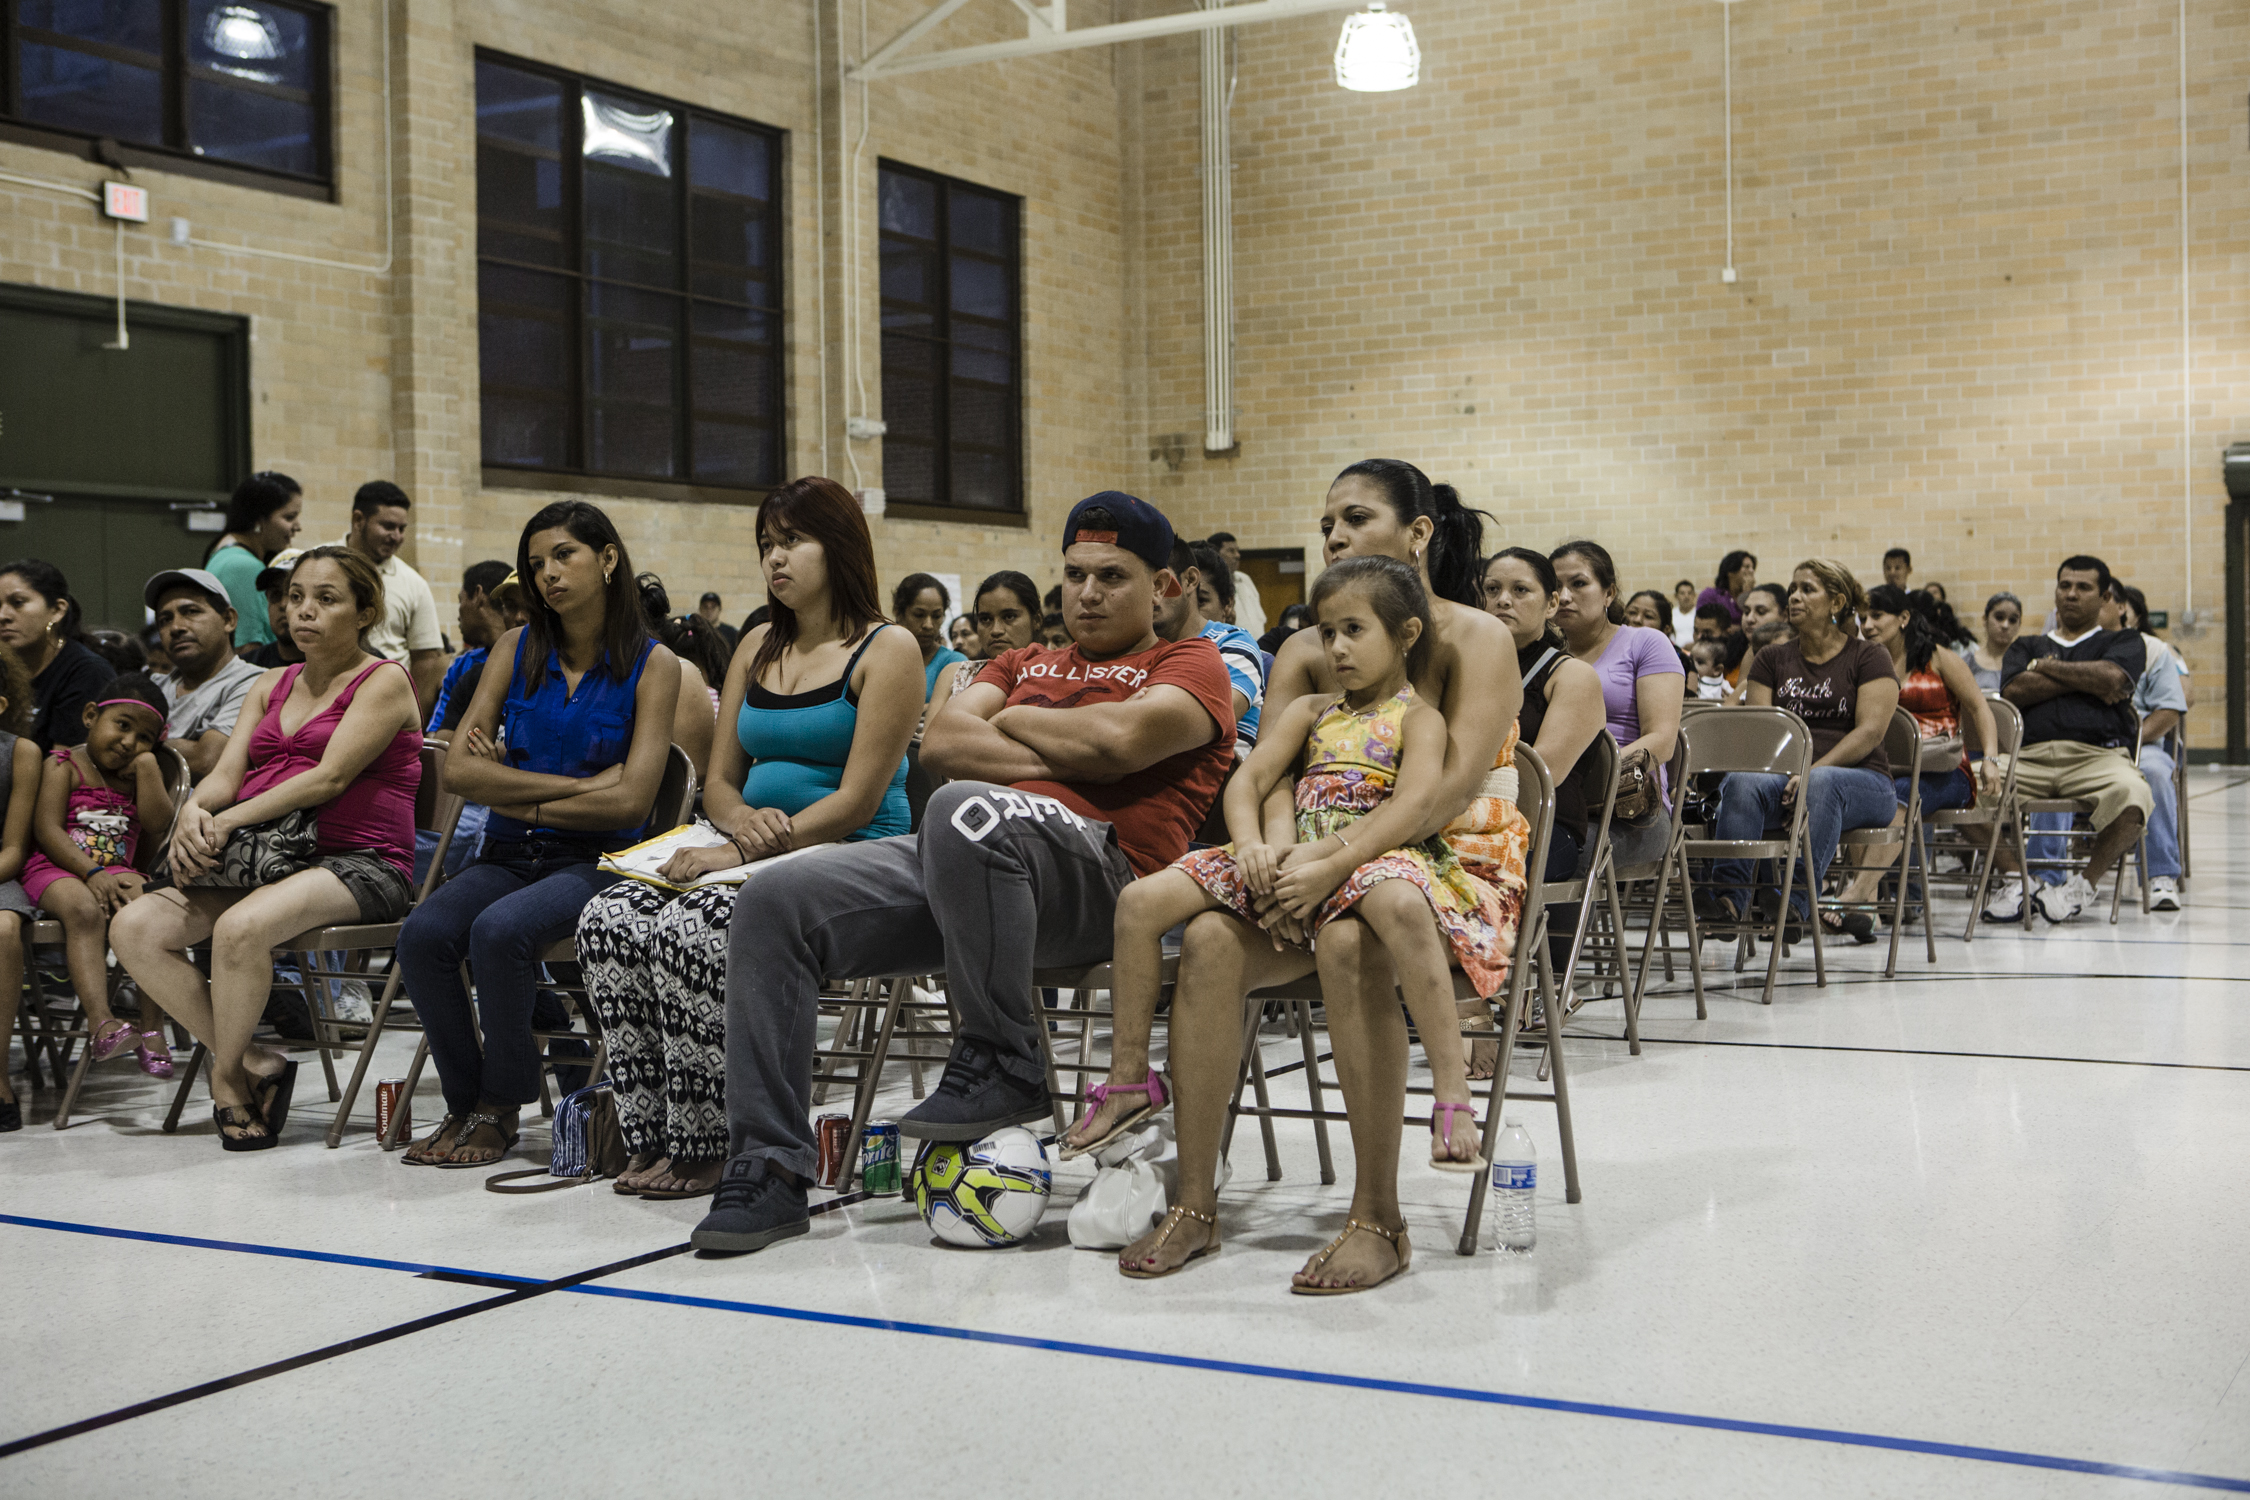 Attendees listen to speakers at the weekly meeting of "Congreso," or the Congress of Day Laborers. This is one branch of the New Orleans Workers' Center for Racial Justice, New Orleans, Aug. 6, 2014. (William Widmer for TIME)